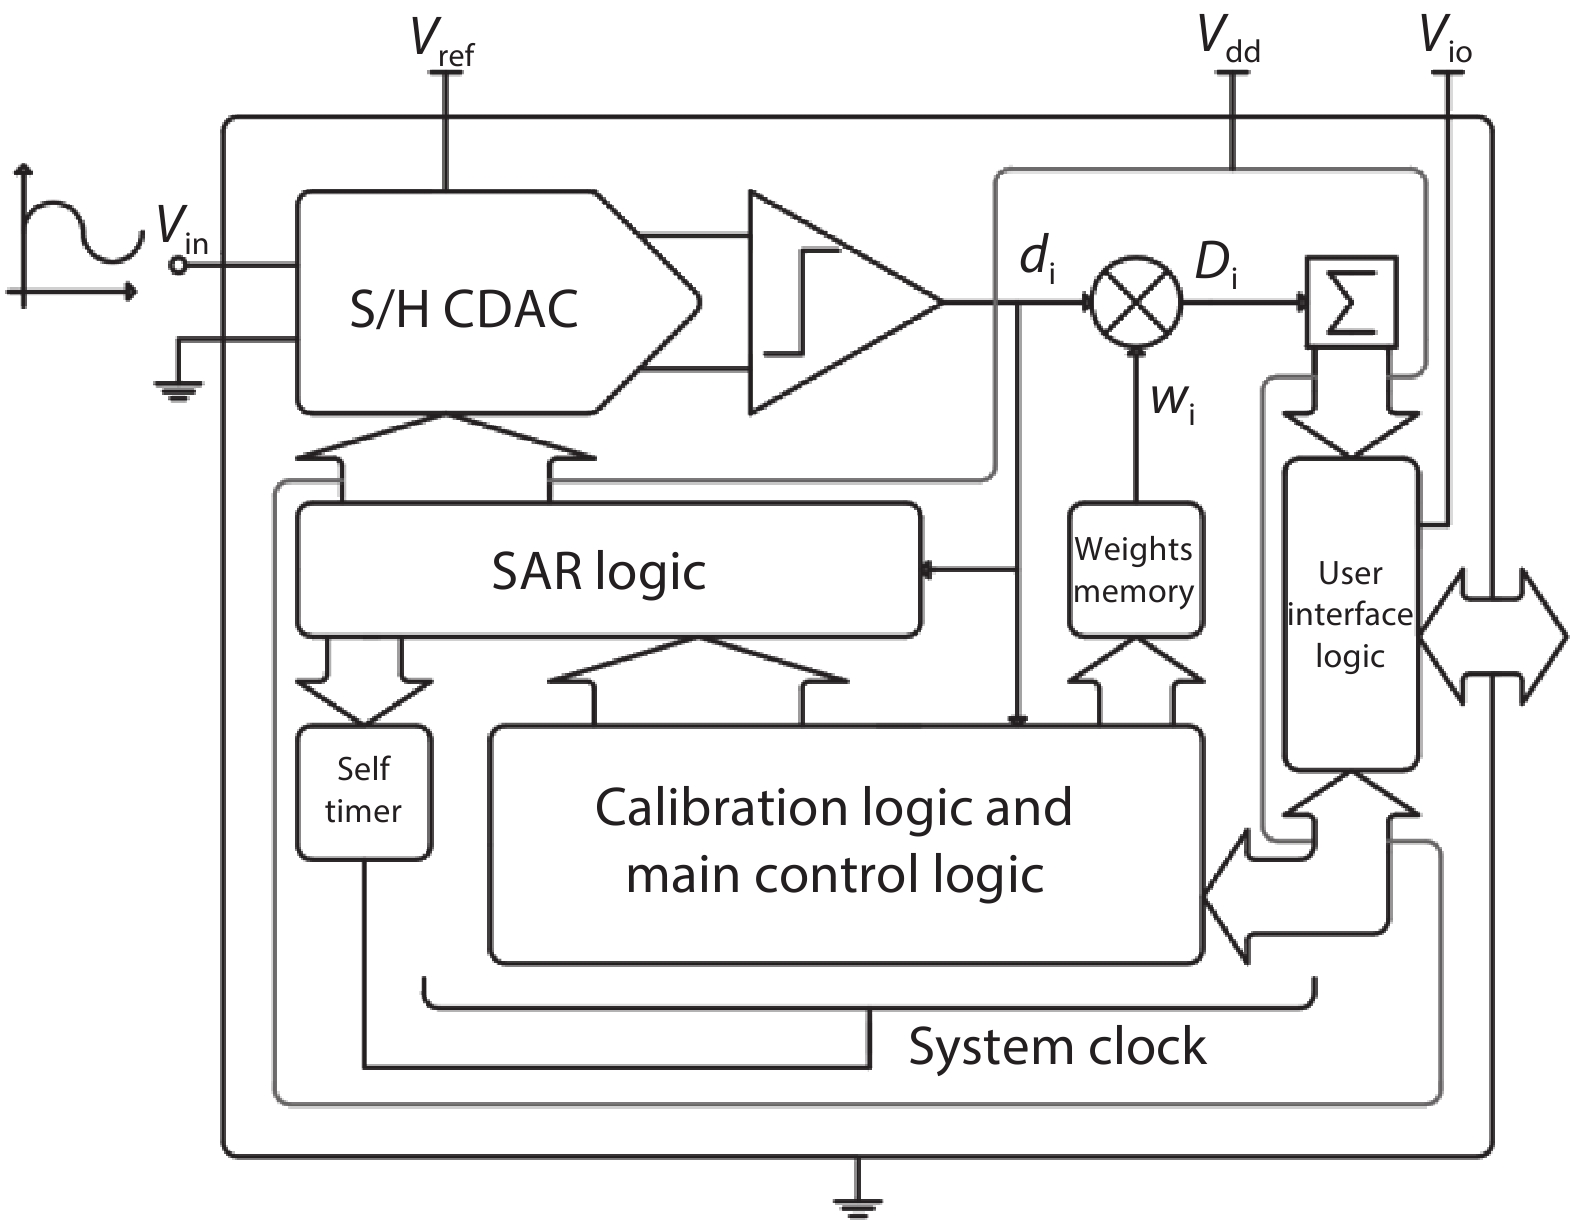 The ADC system architecture.